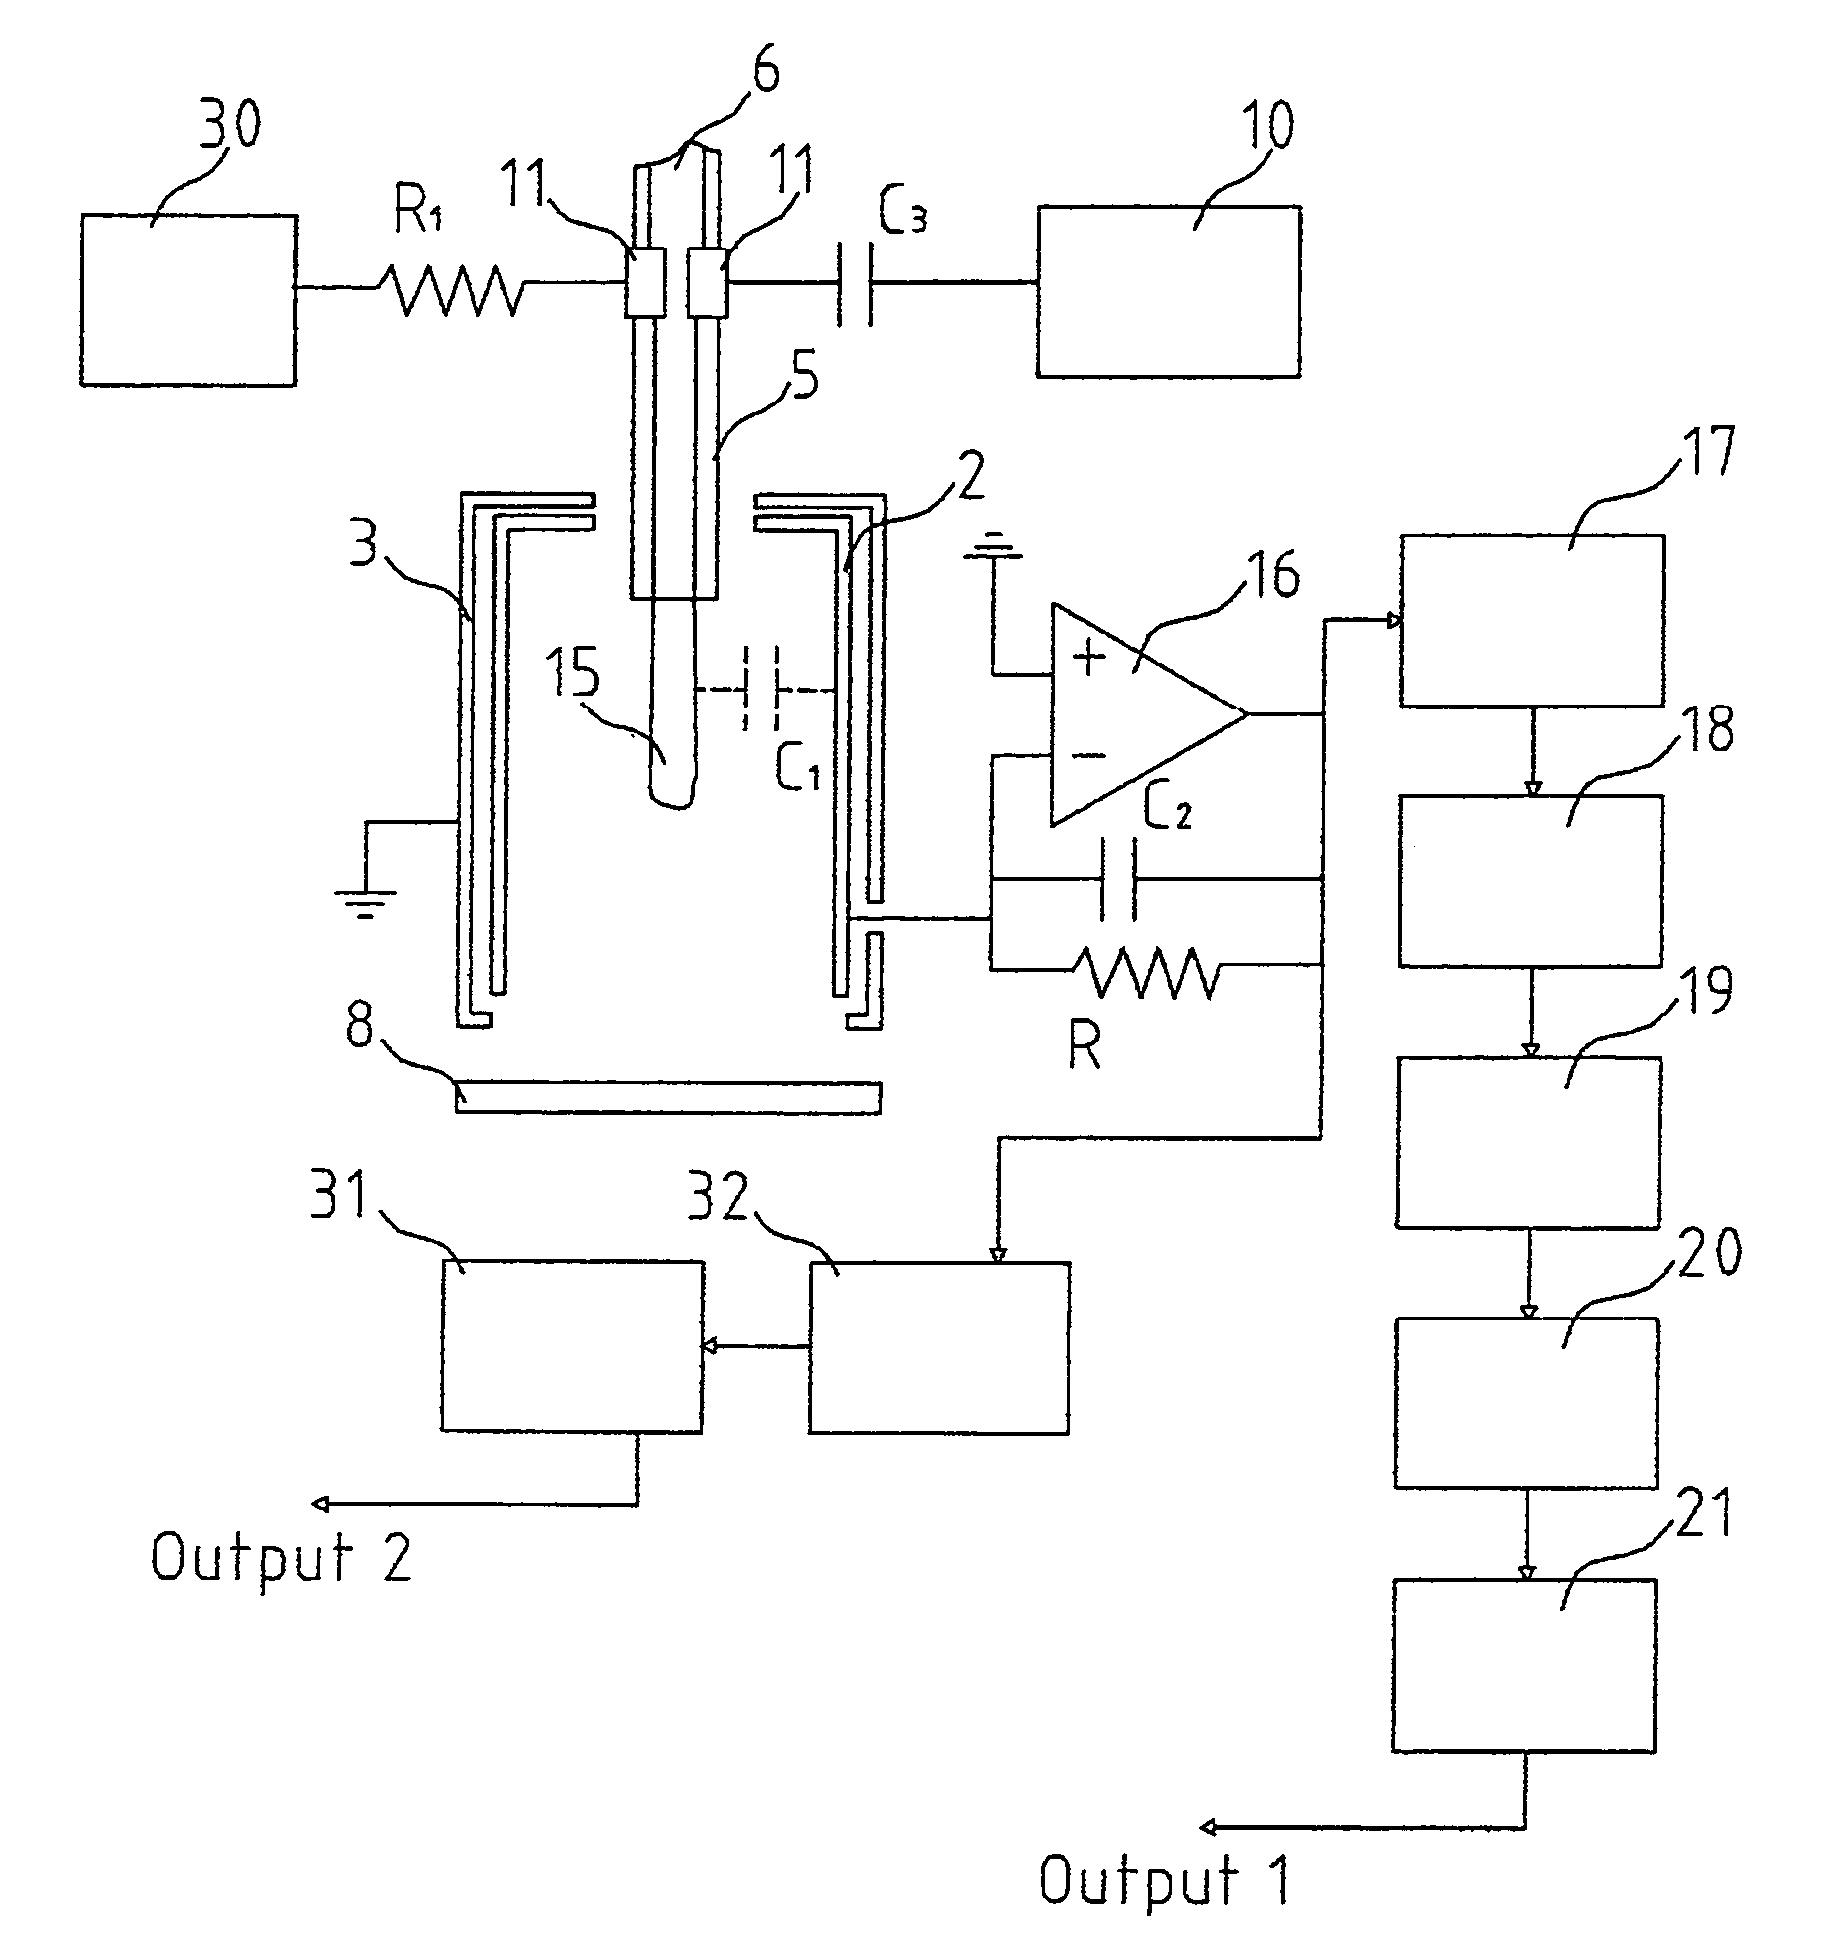 Apparatus and method for droplet measurements